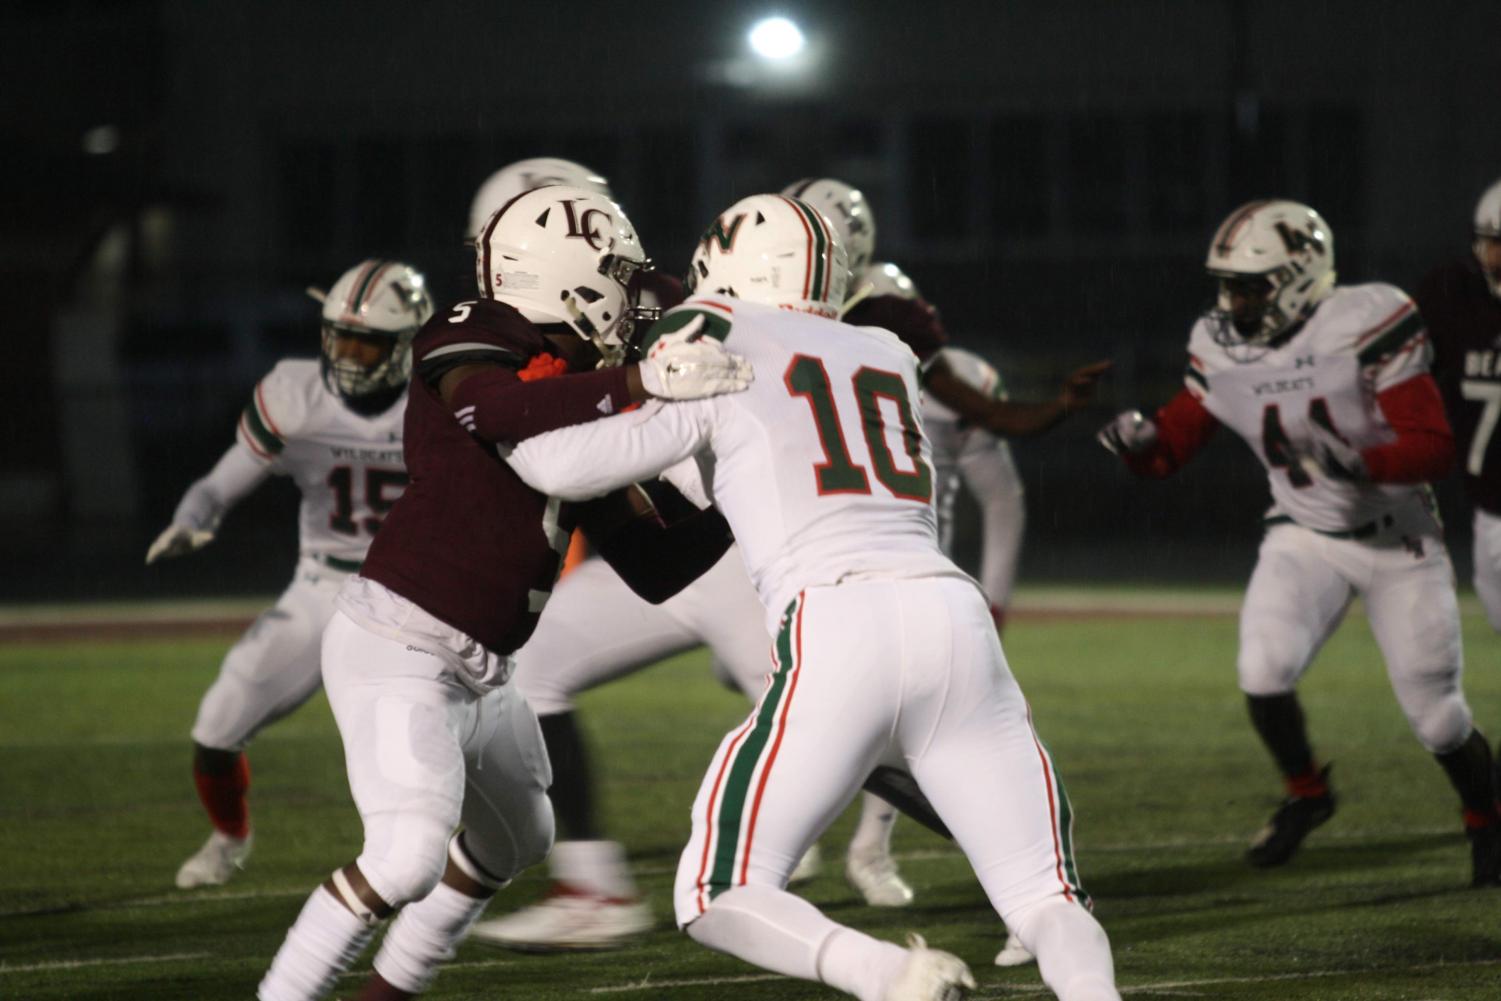 Lawrence North vs. Lawrence Central football Photo Gallery North Star